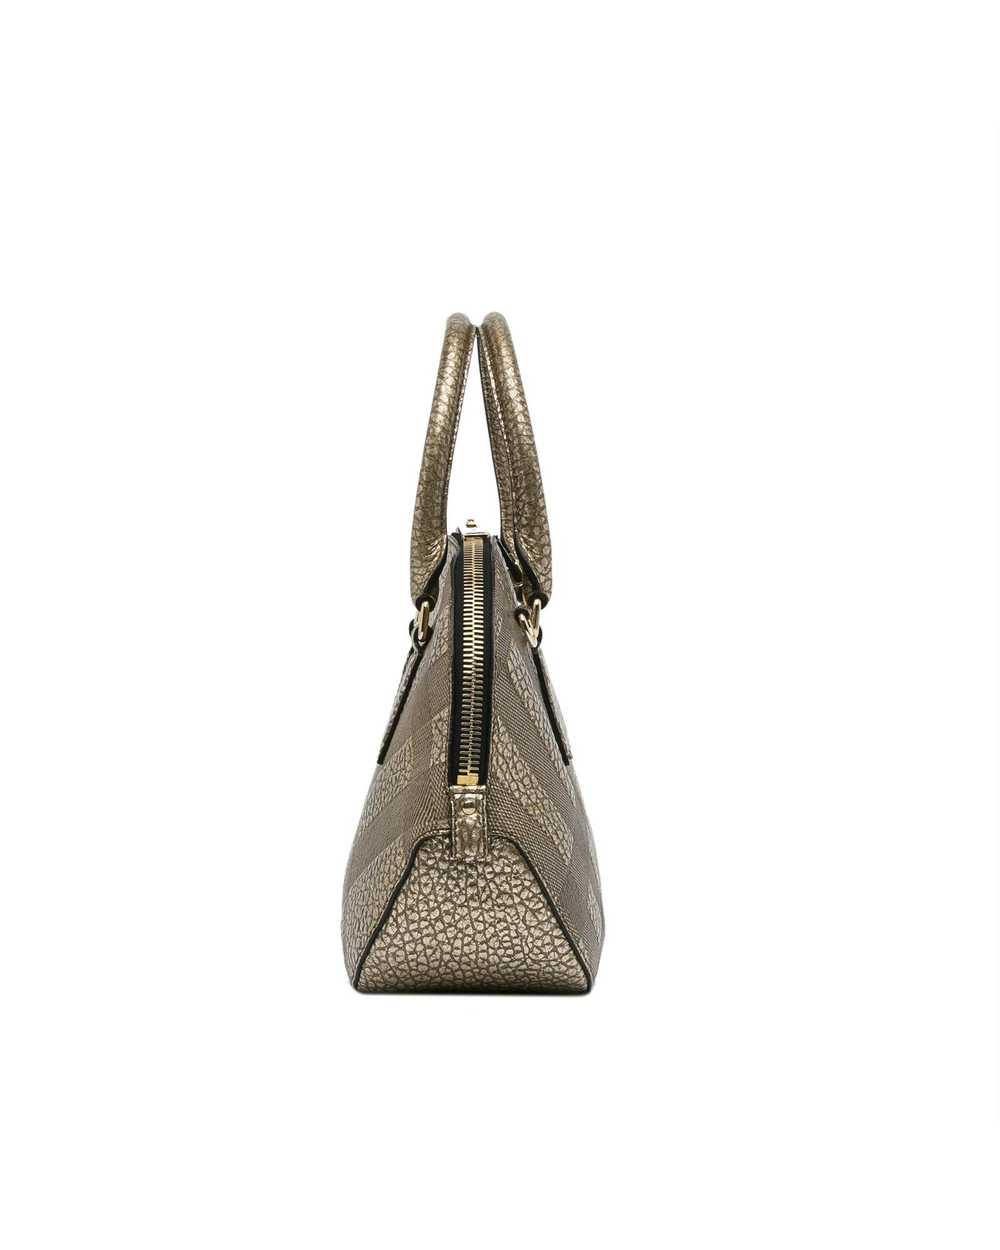 Burberry Grained Leather Orchard Handle Bag - image 4